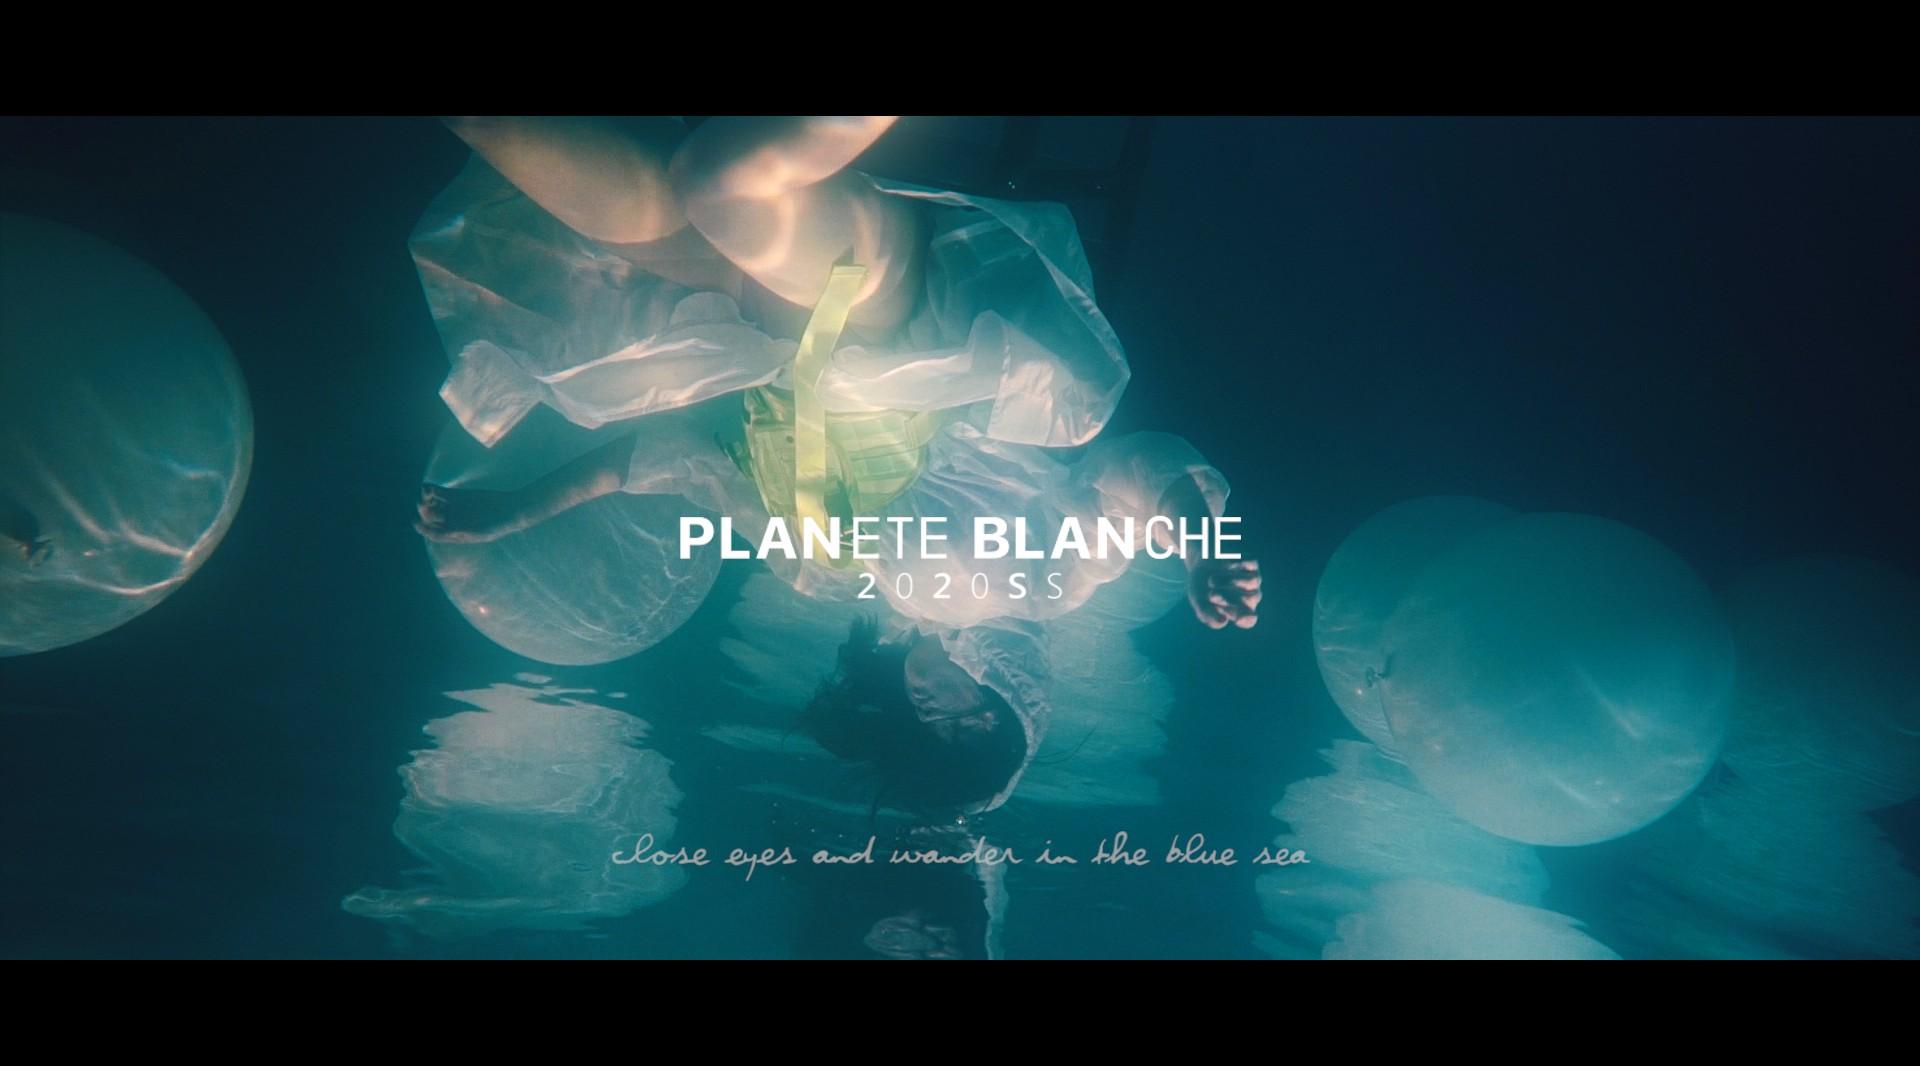 PLANETE BLANCHE 2020SS FLY IN THE WATER